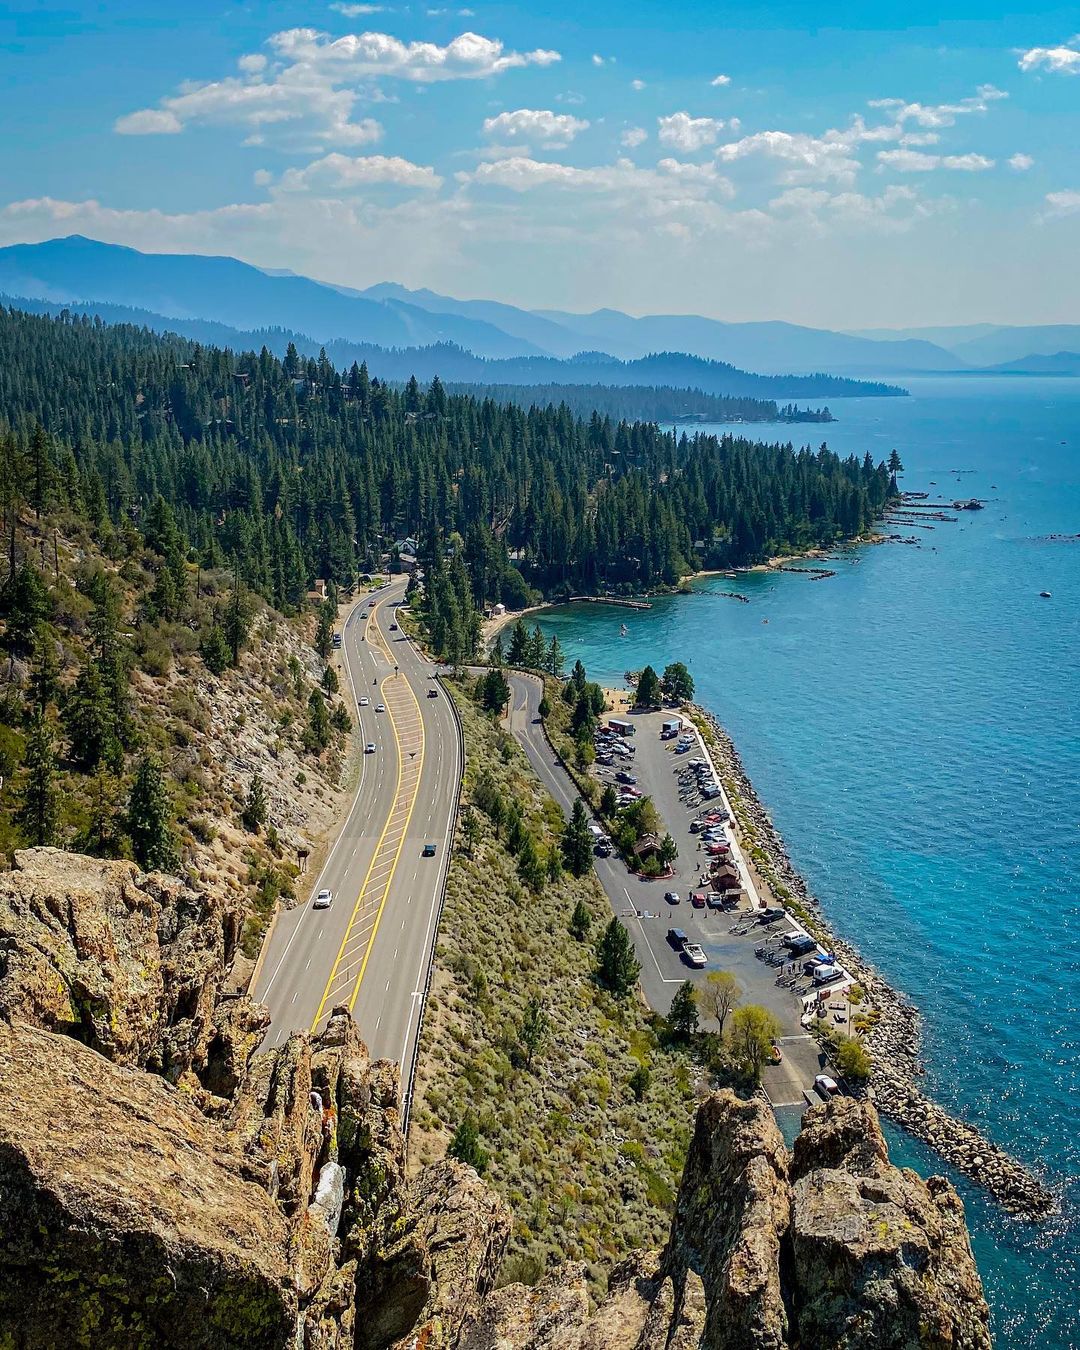 View of the Highway Going Along Lake Tahoe in South Lake Tahoe, CA. Photo by Instagram user @heyloslos